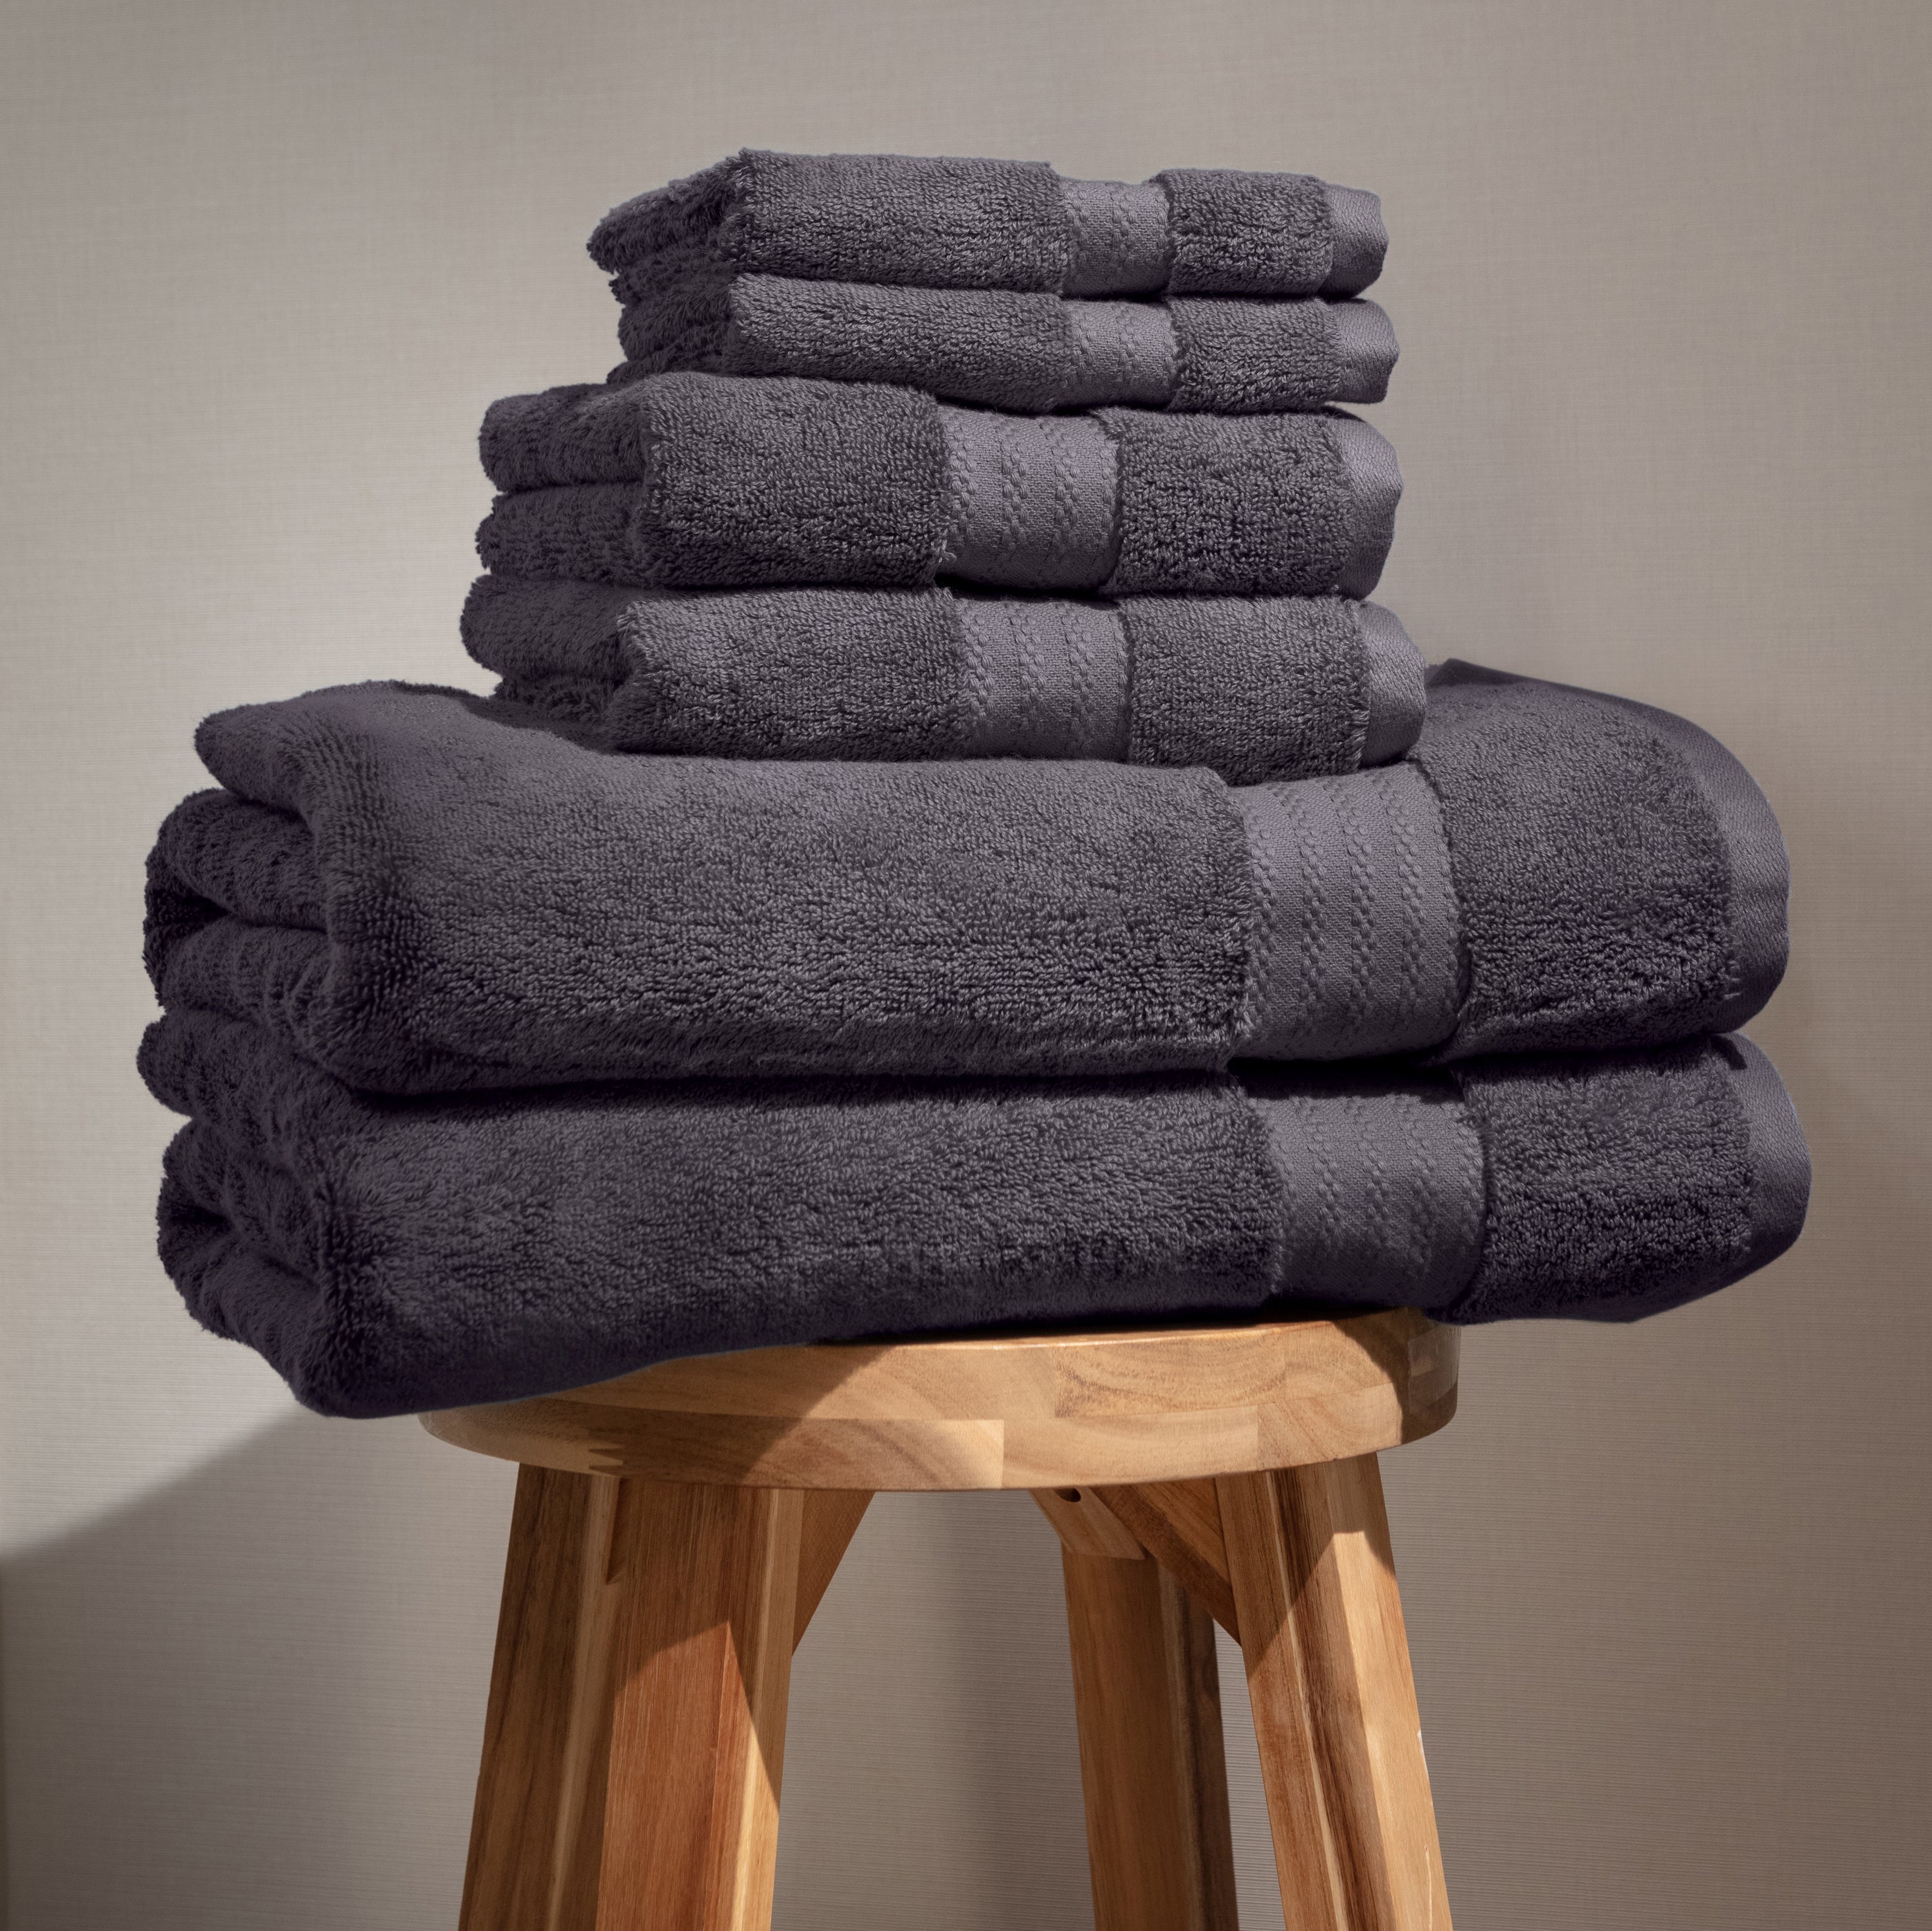 Organic Towel Sets in Space Grey, Towel Collections